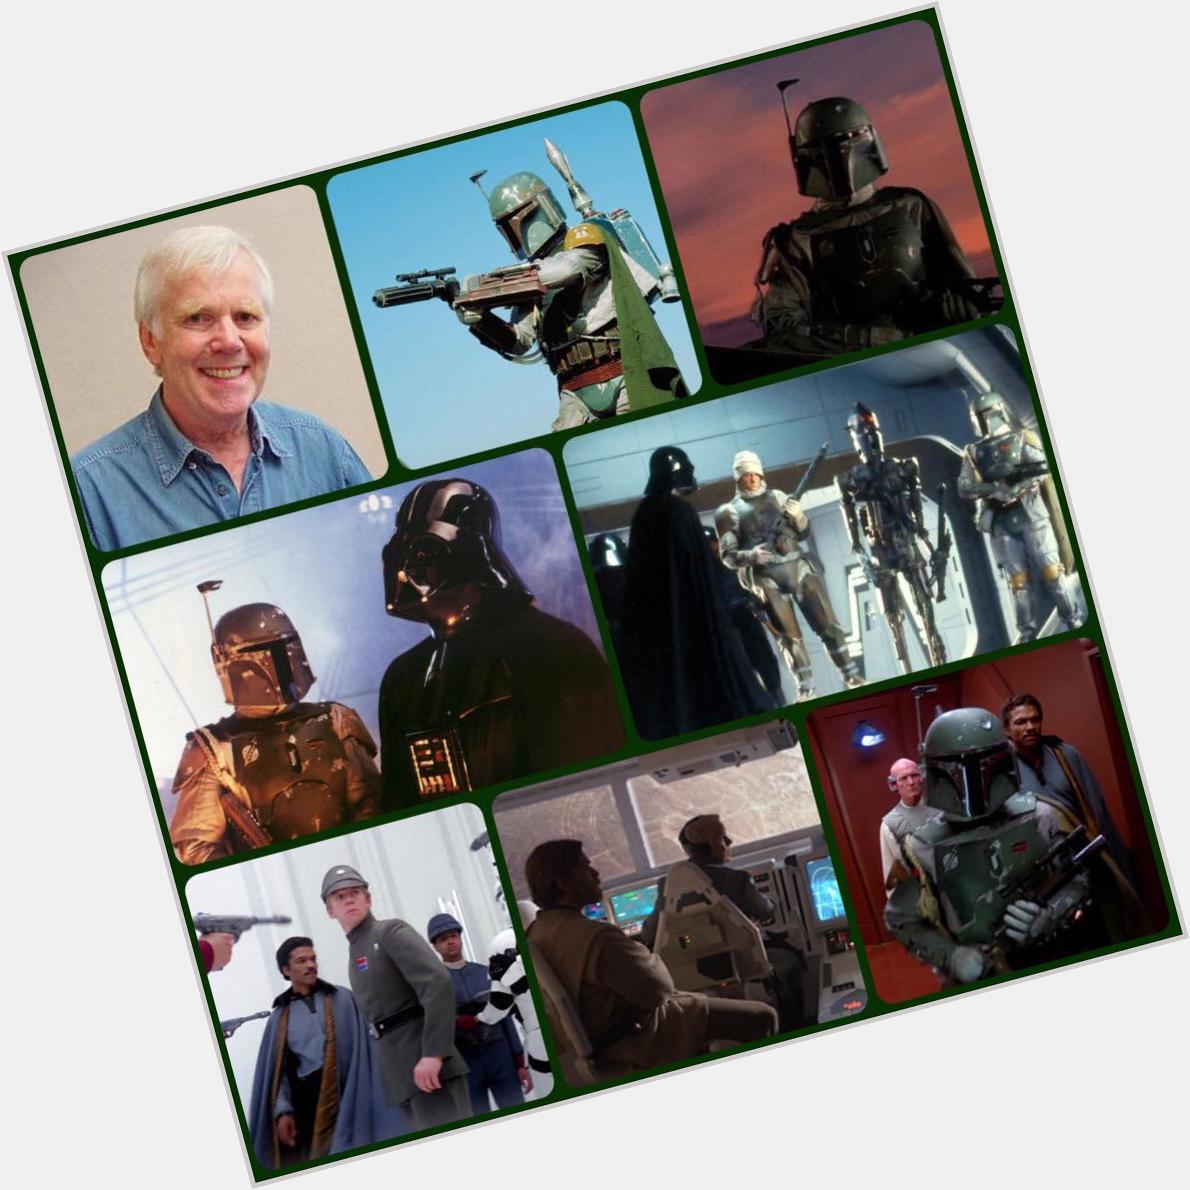 Happy Birthday to the actor Jeremy Bulloch, bounty hunter in the Trilogy. Via 